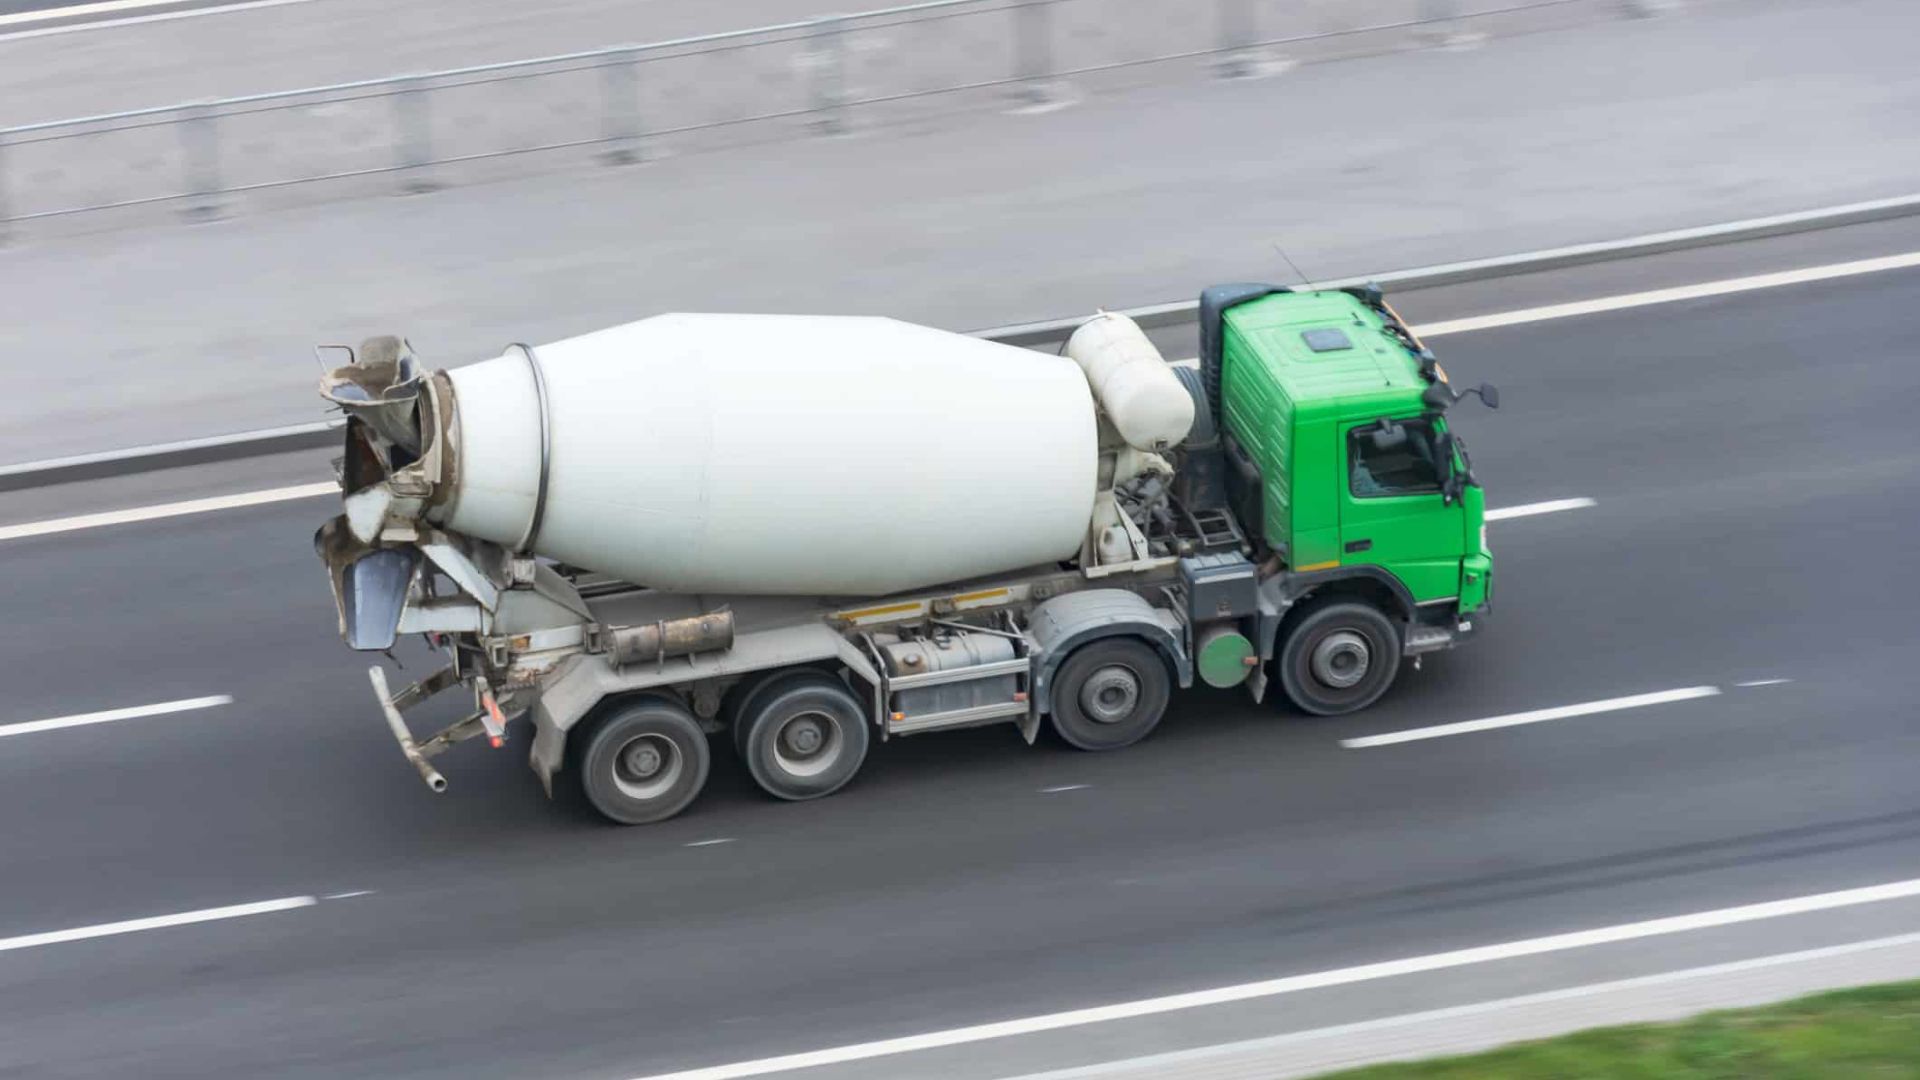 A Cement Truck Moving On Road